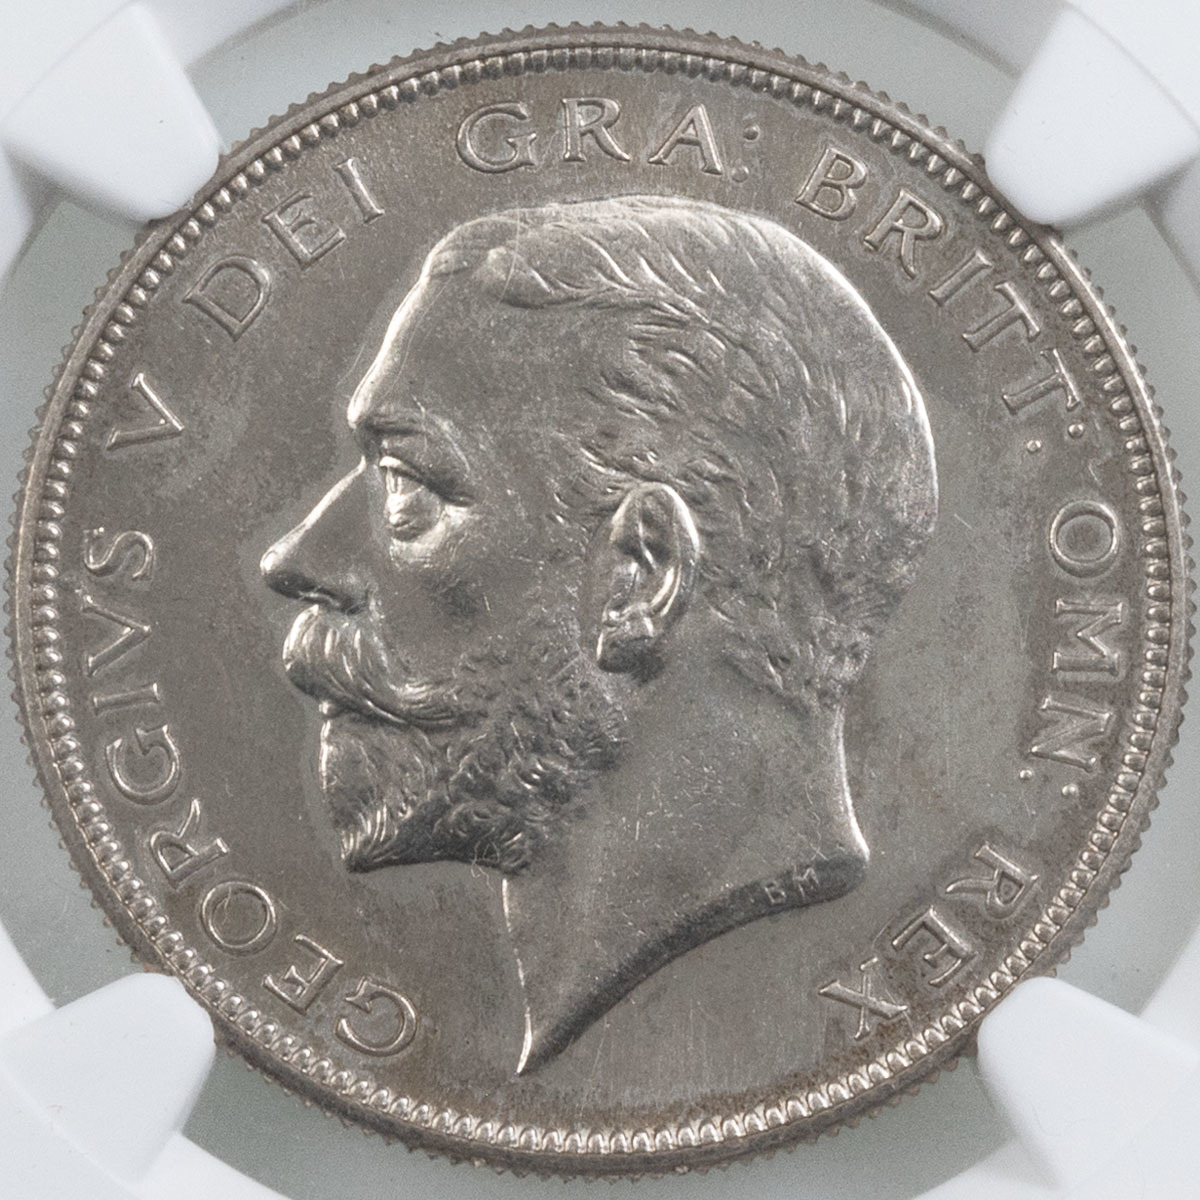 1927 King George V Silver Proof Halfcrown Coin NGC Graded PF 64 Obverse